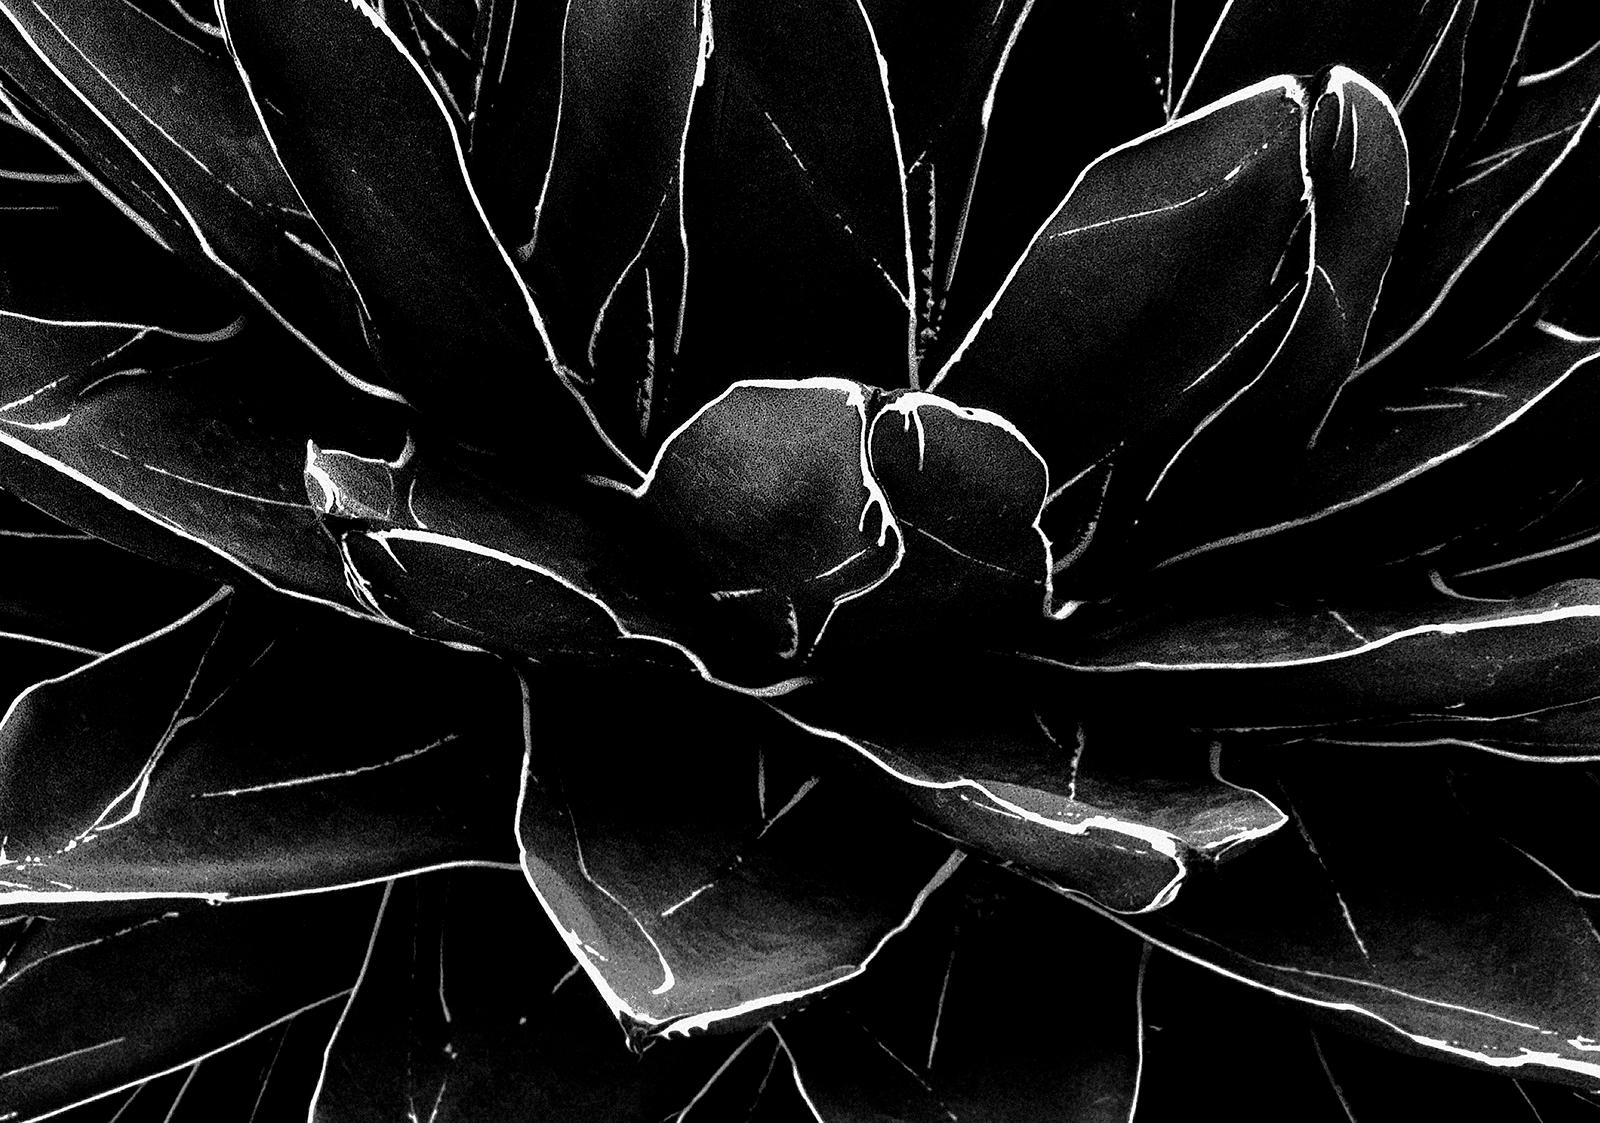 Cactus -Signed limited edition fine art print, Black white nature photograph - Photograph by Ian Sanderson